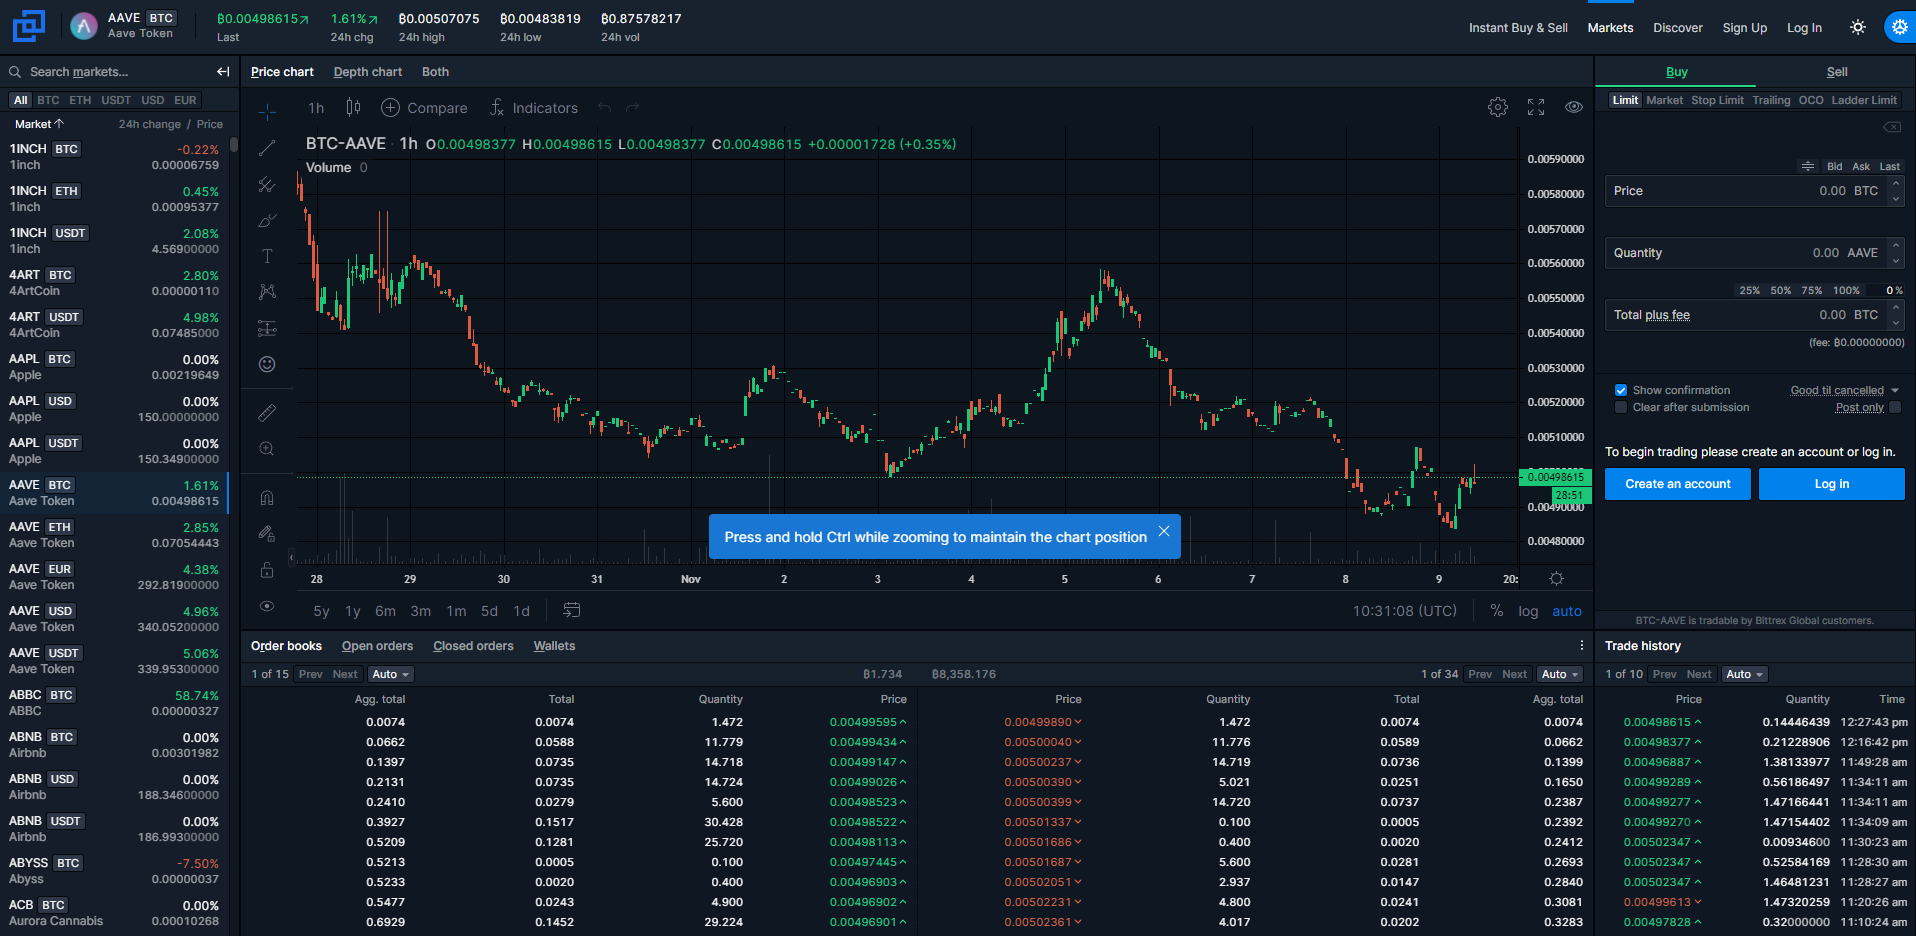 Bittrex trading interface overview.